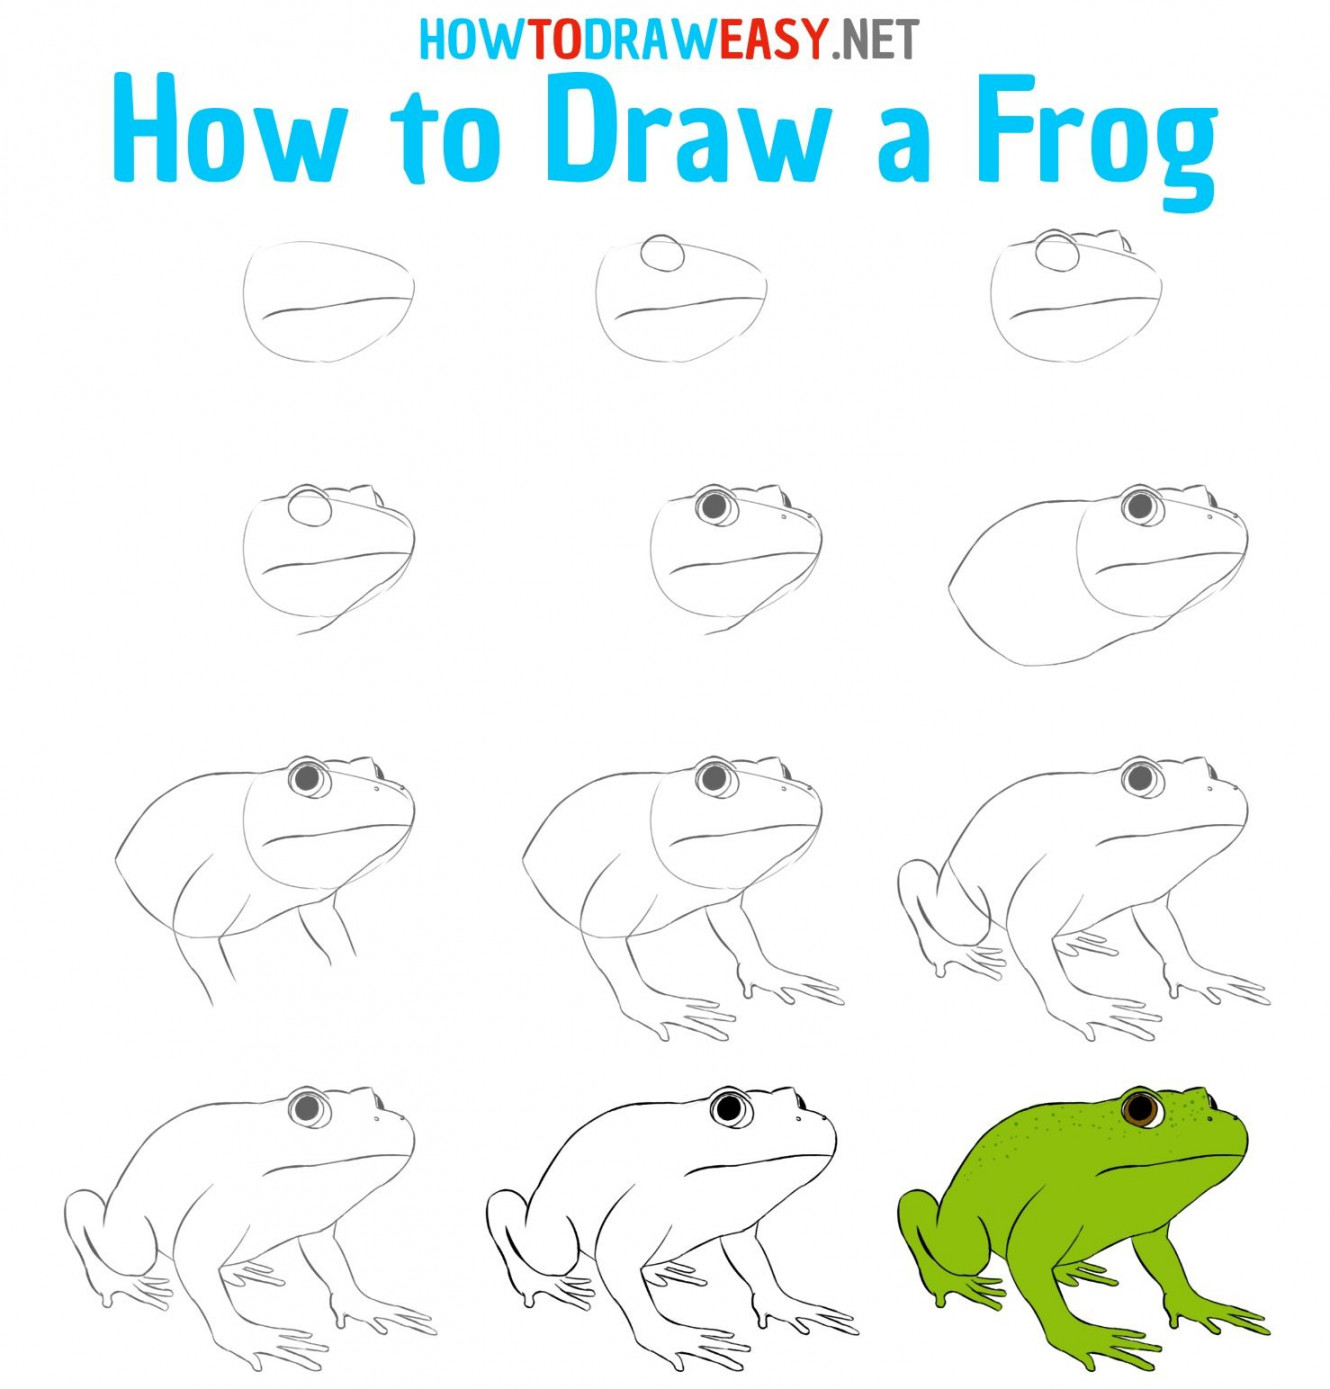 How to Draw a Frog Step by Step  Frog drawing, Easy drawings